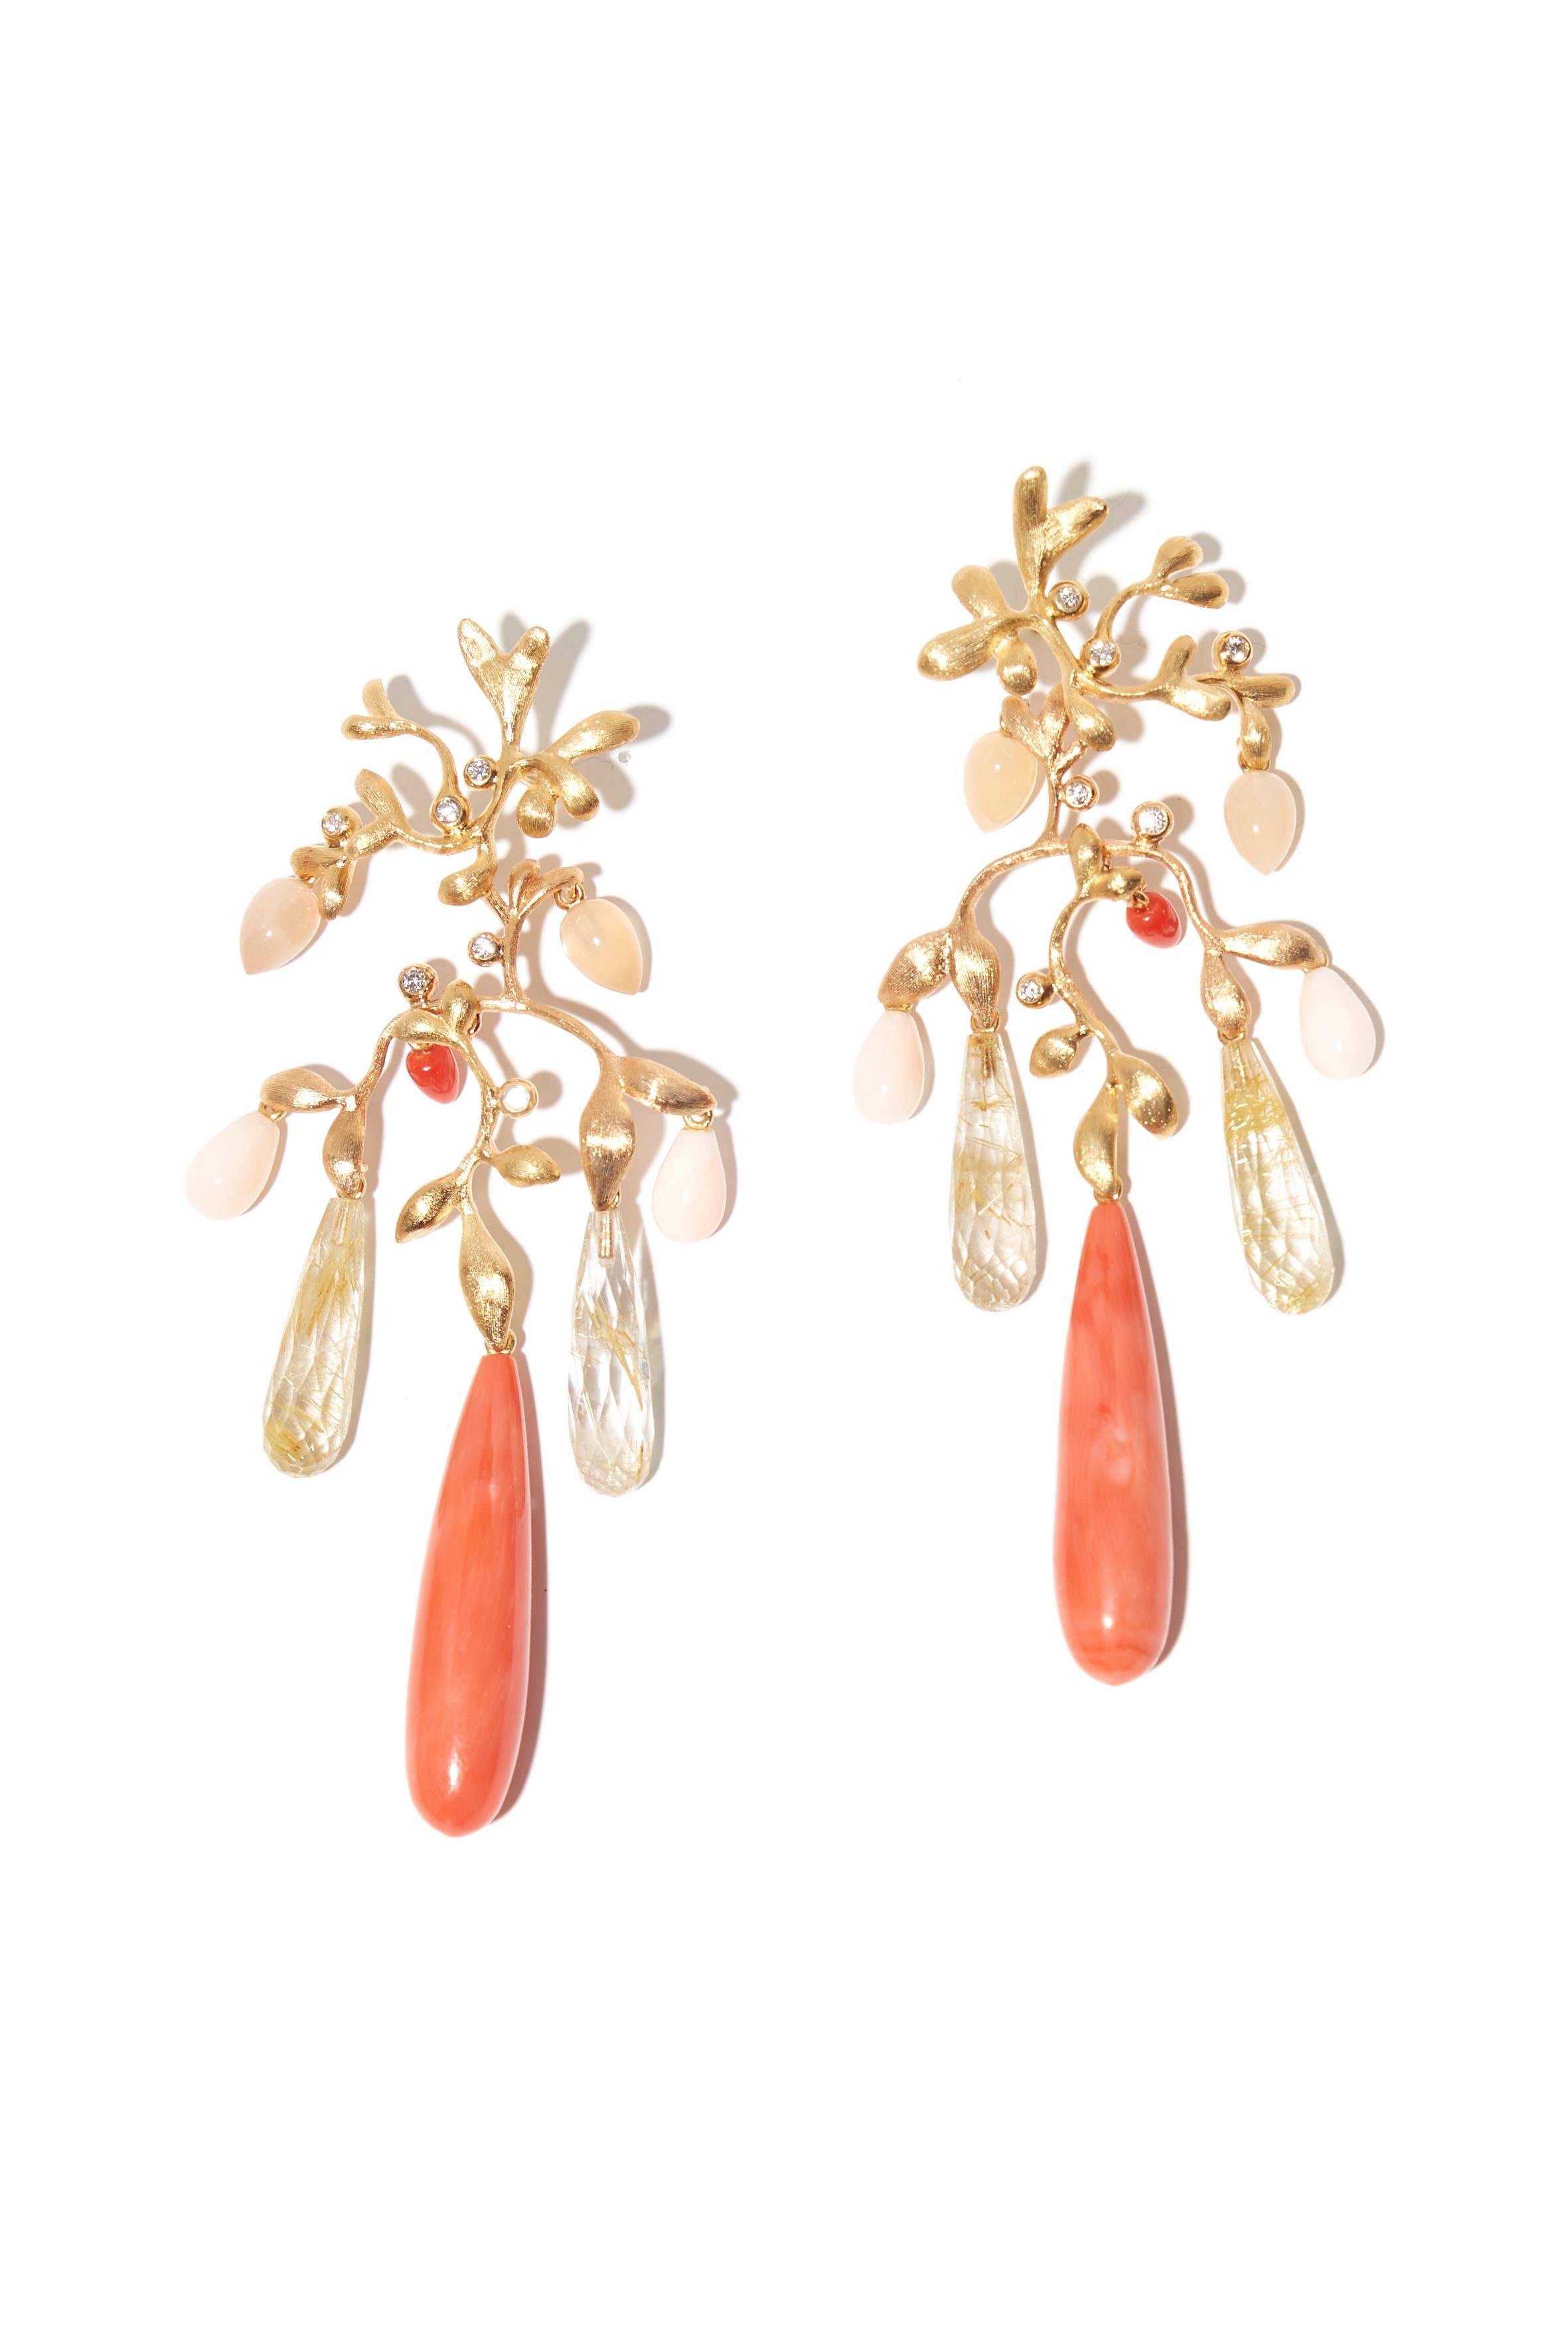 Festive Ole Lynggaard Chandelier arrings. With drops in a mesmerizing shade of beige-orange coral, alternated with rutile quartz drops and red coral drops. Shining diamonds to a total of 0.21 crts (TW/VS).

These earrings are a limited